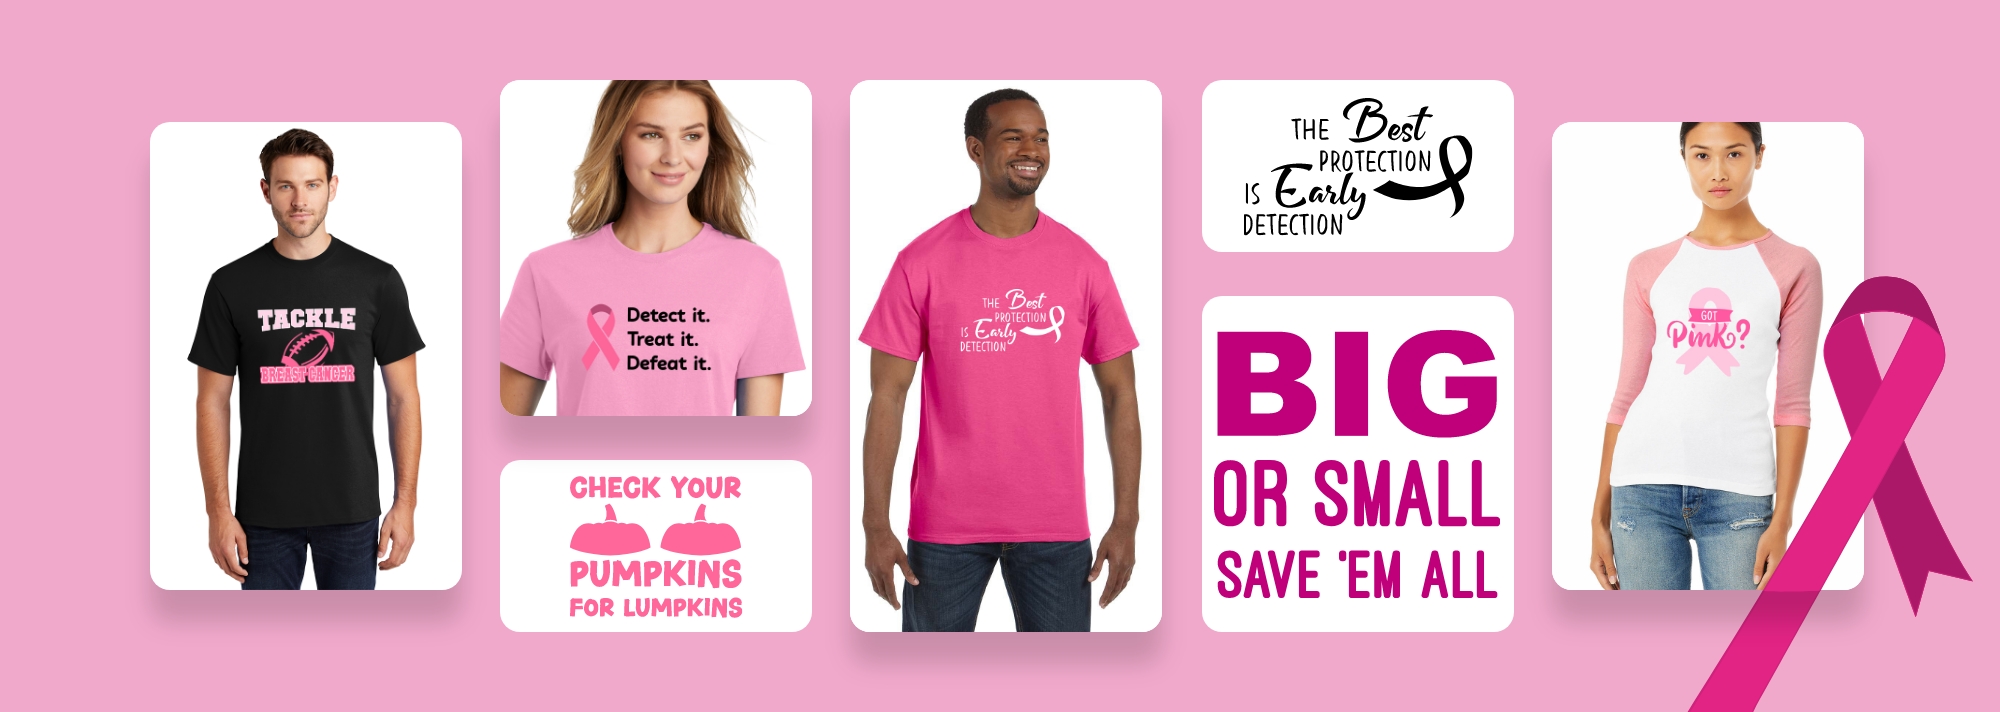 Breast Cancer Awareness Month T-Shirt Design Ideas: Quotes, Sayings & Slogans